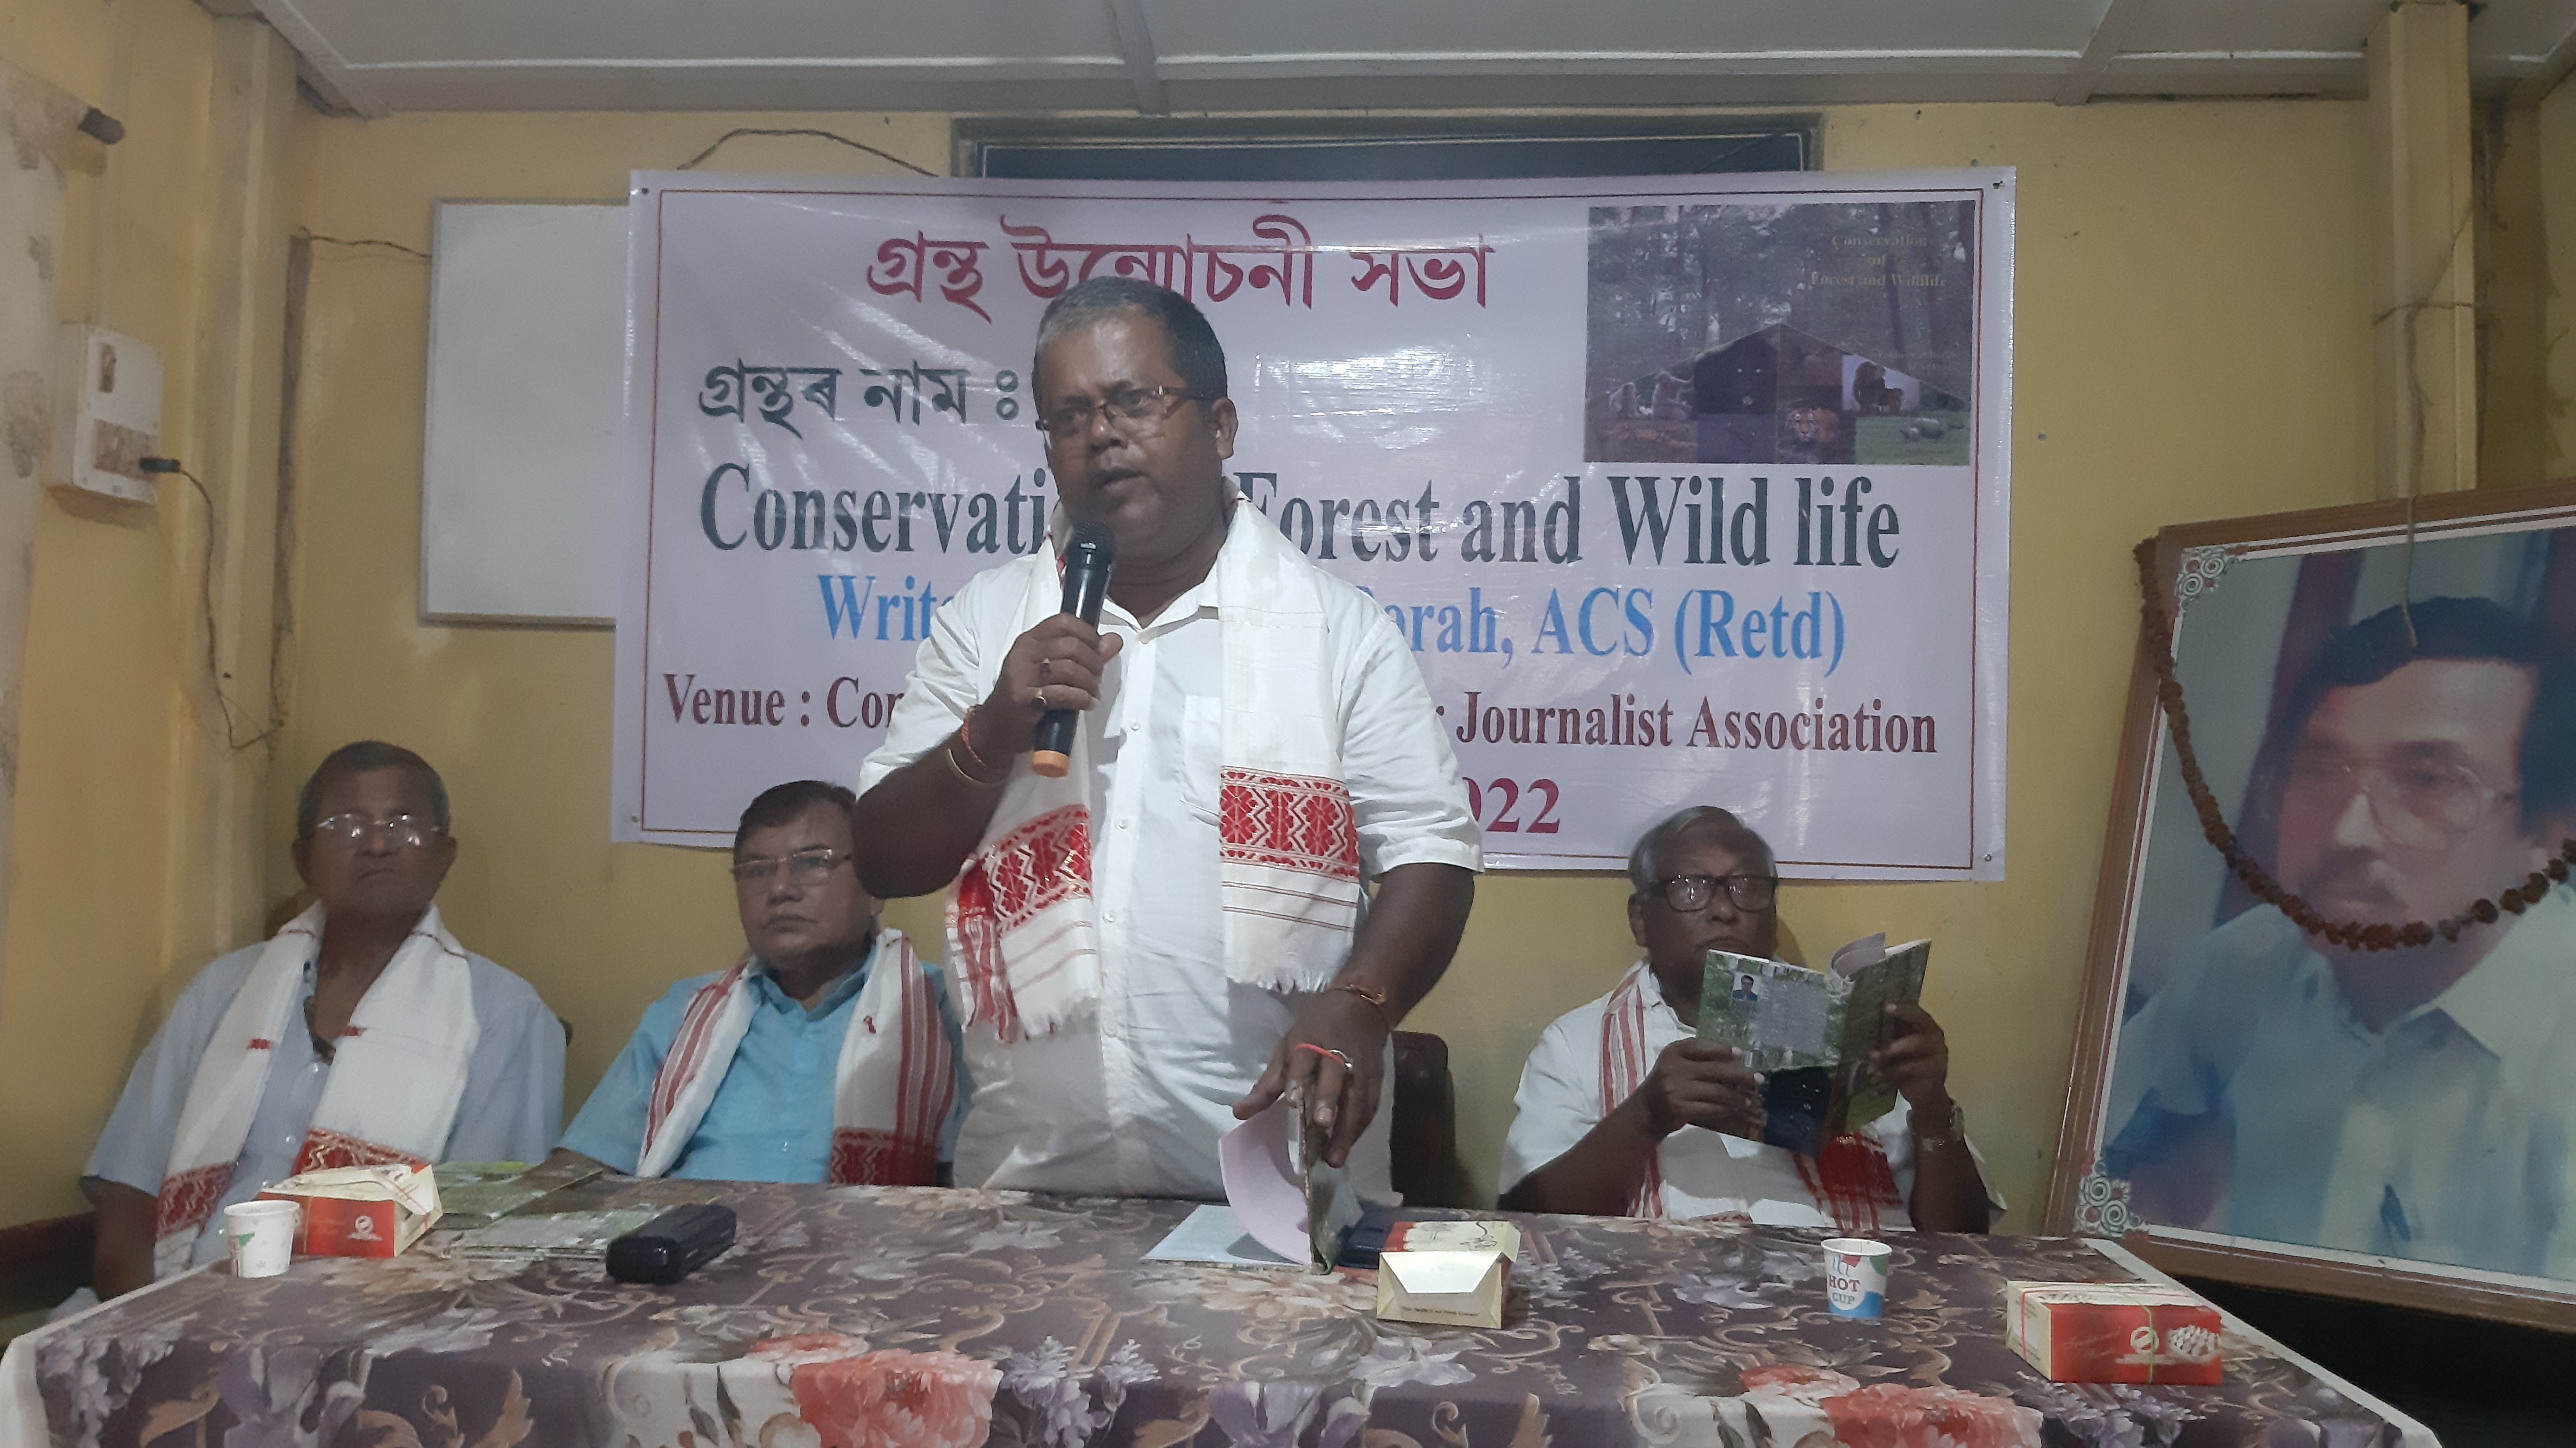 Conservation of Forest and Wildlife book released